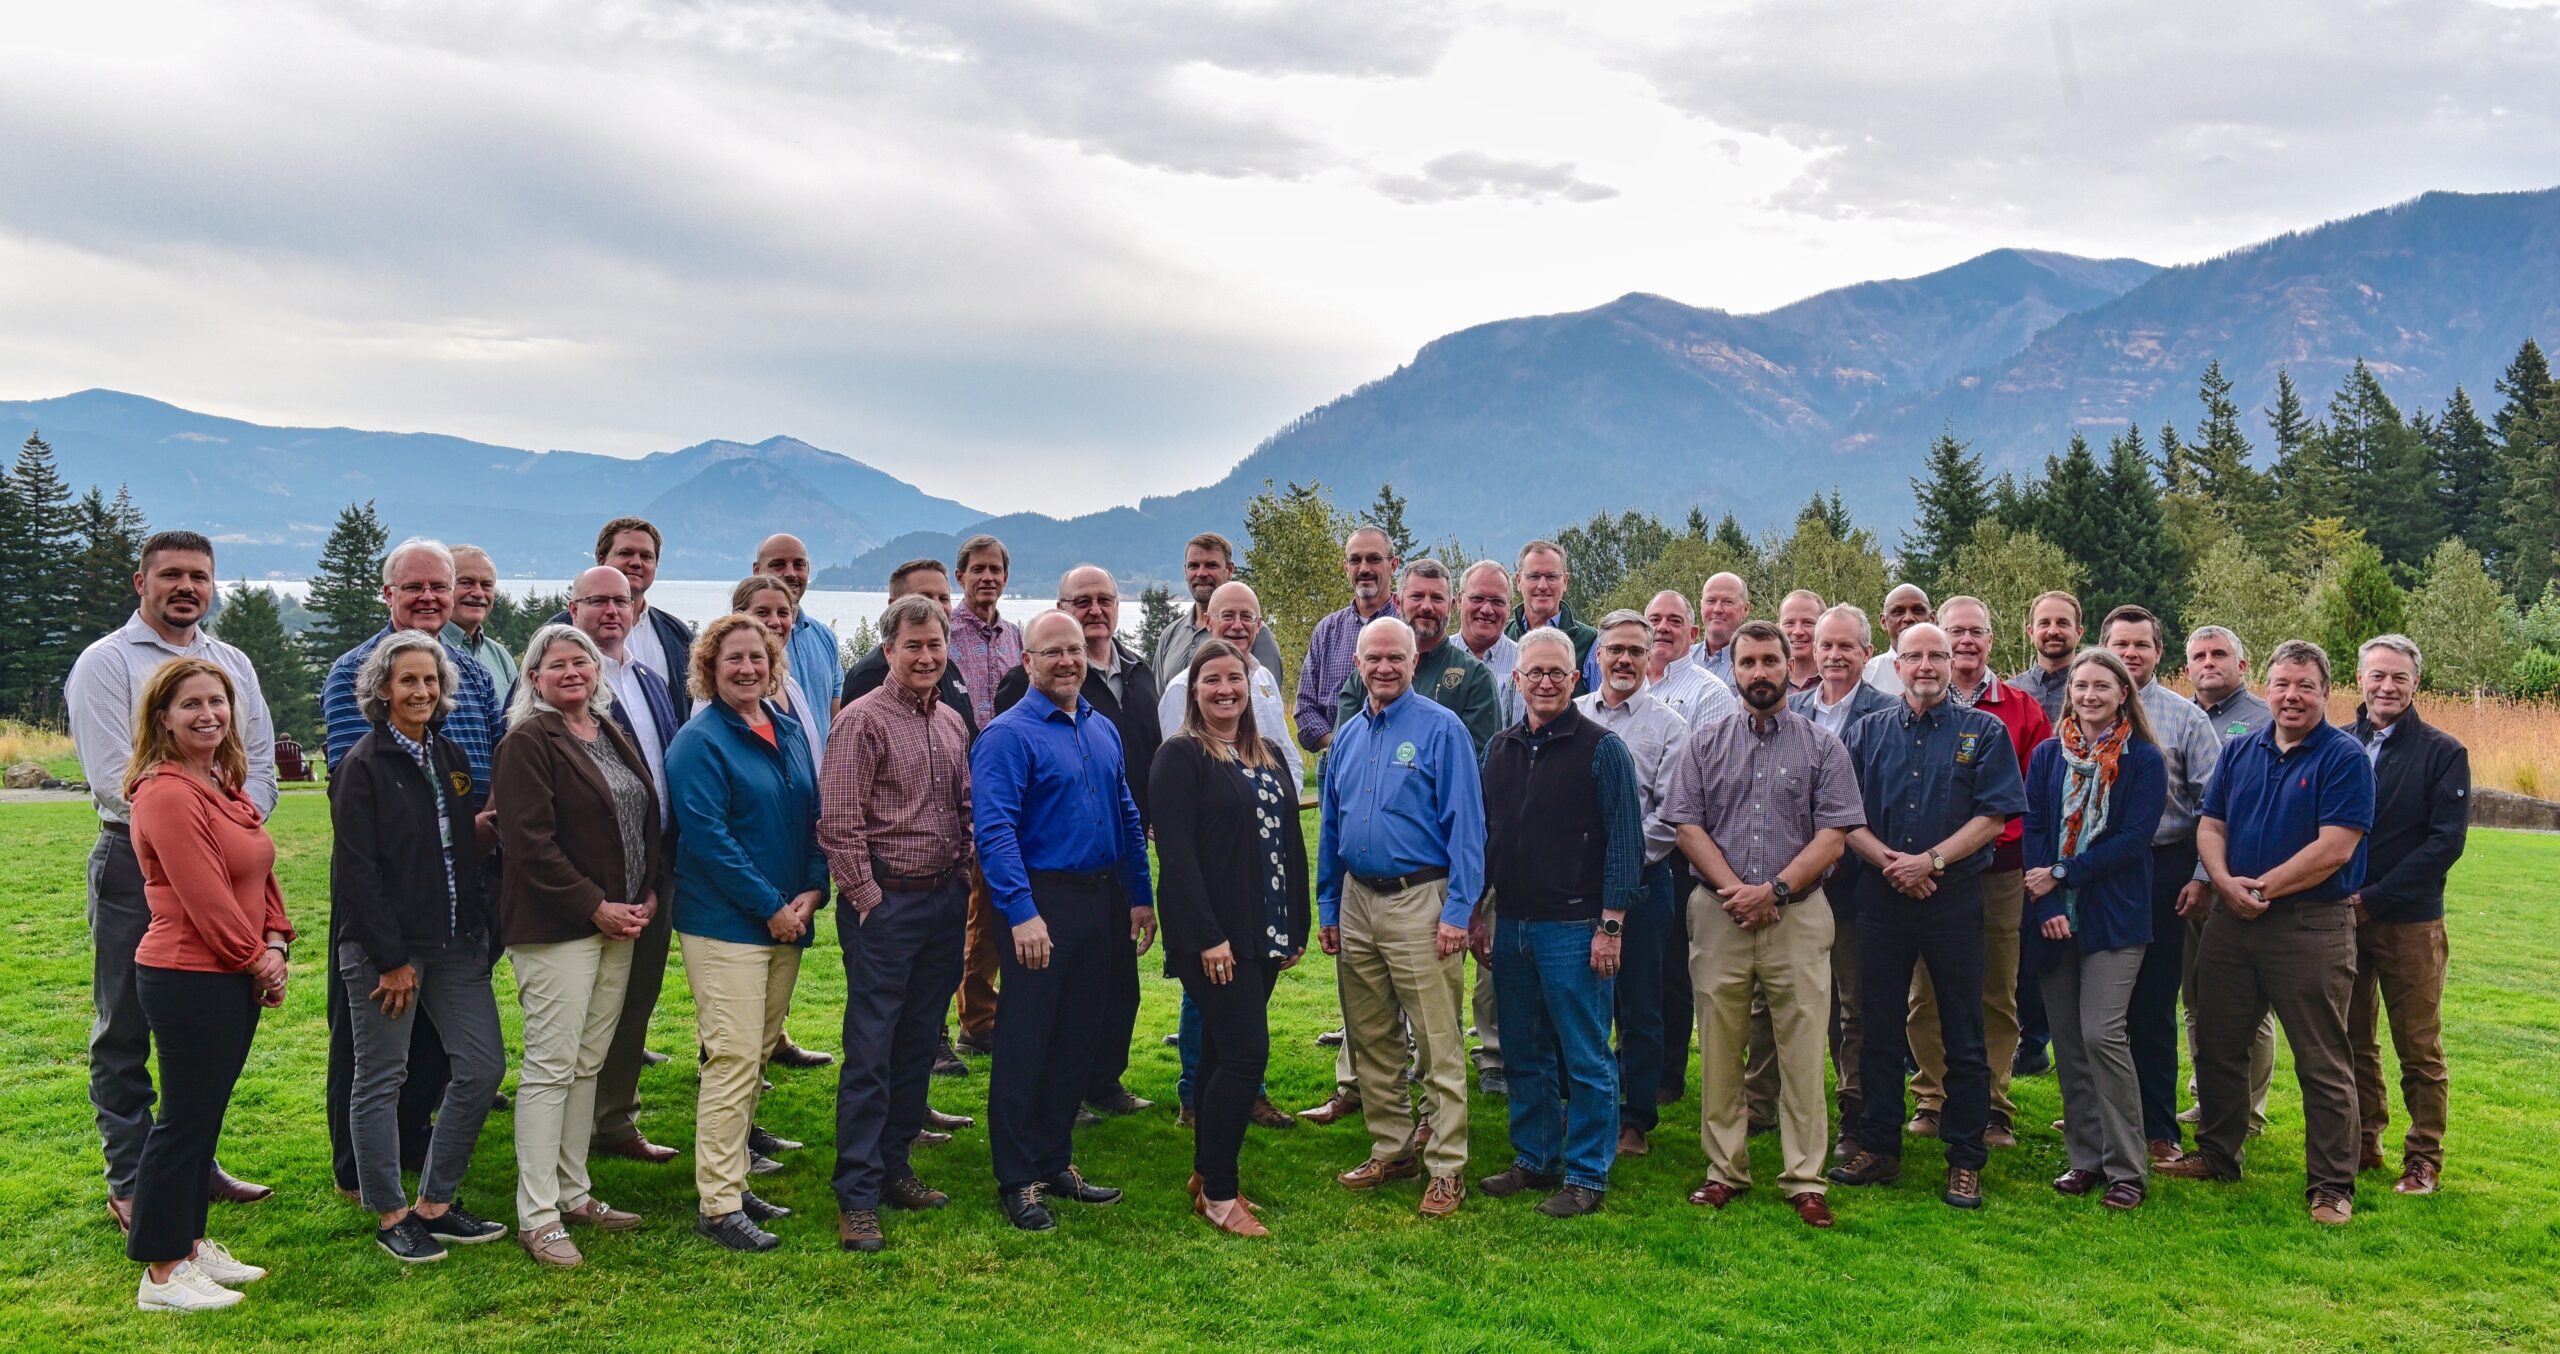 State foresters pose at 2022 Annual Meeting in Washington